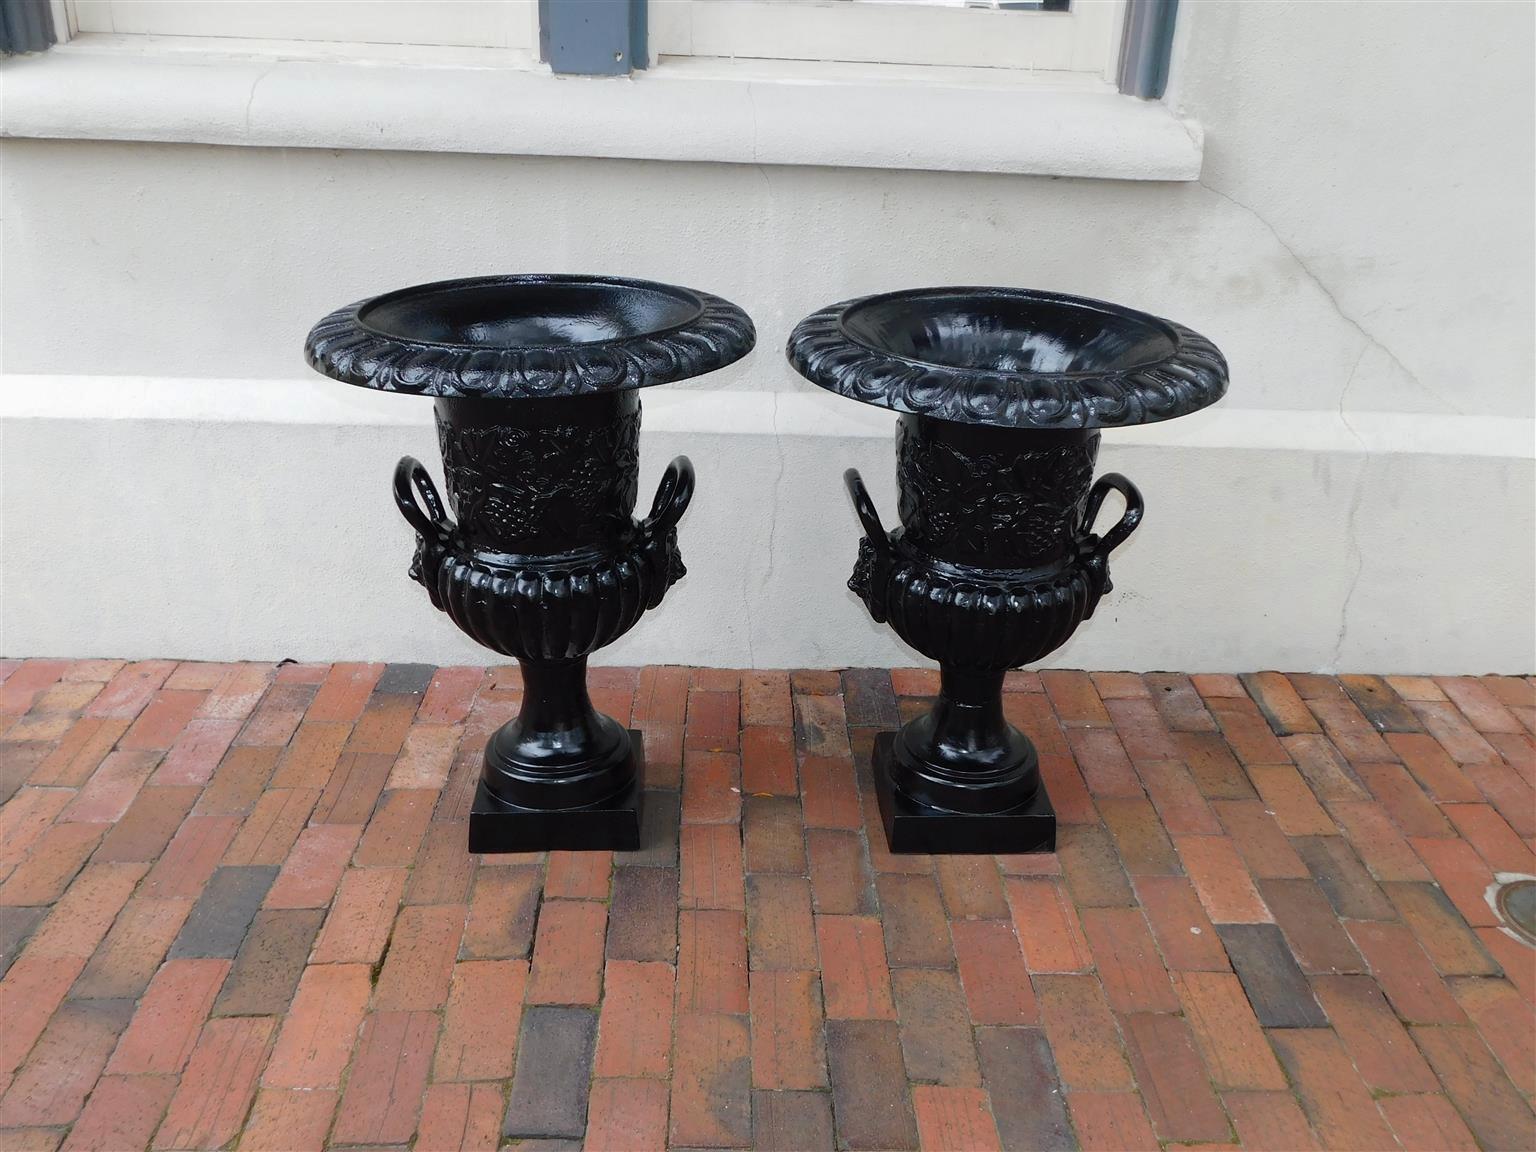 Pair of English cast iron and powered coated campana-form garden urns with an exterior intertwined grape vine frieze, flanking figural lion side handles, and resting on gadrooned circular squared plinths, Mid- 19th century. Pair have been powder